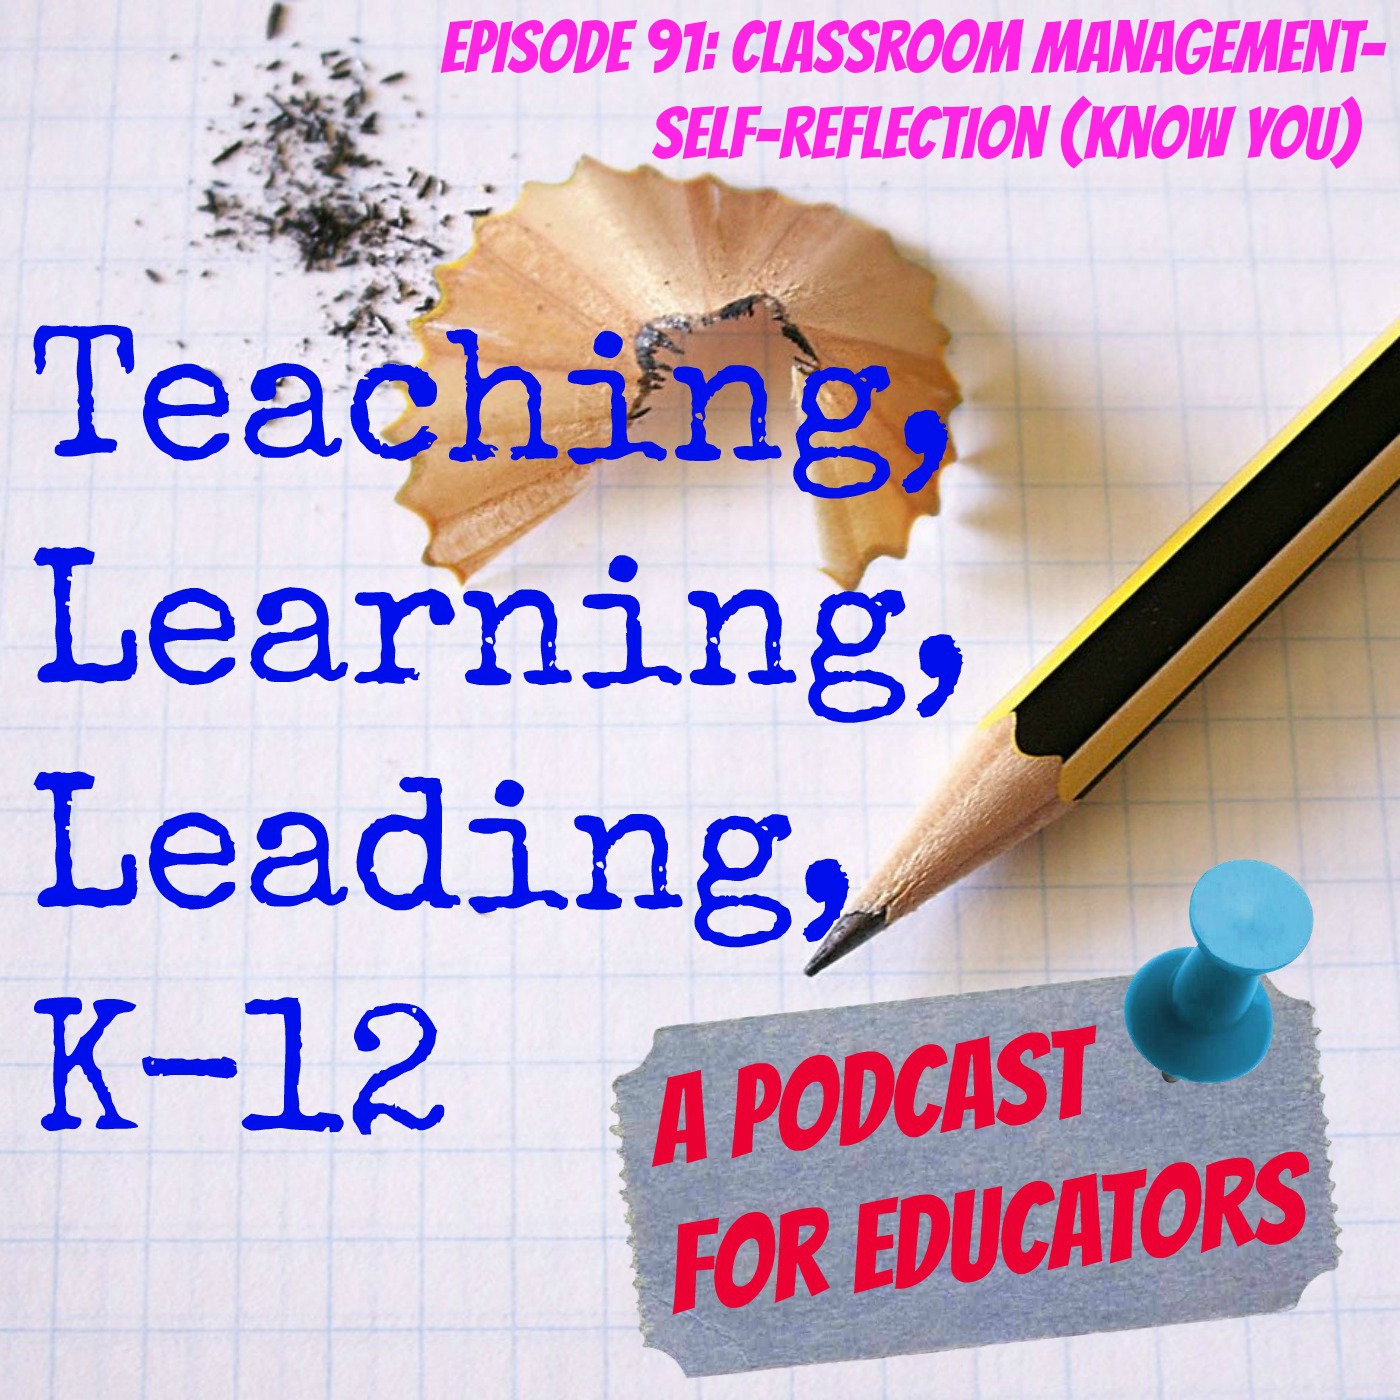 Episode 91: Classroom Management - Self-reflection (Know You) Image